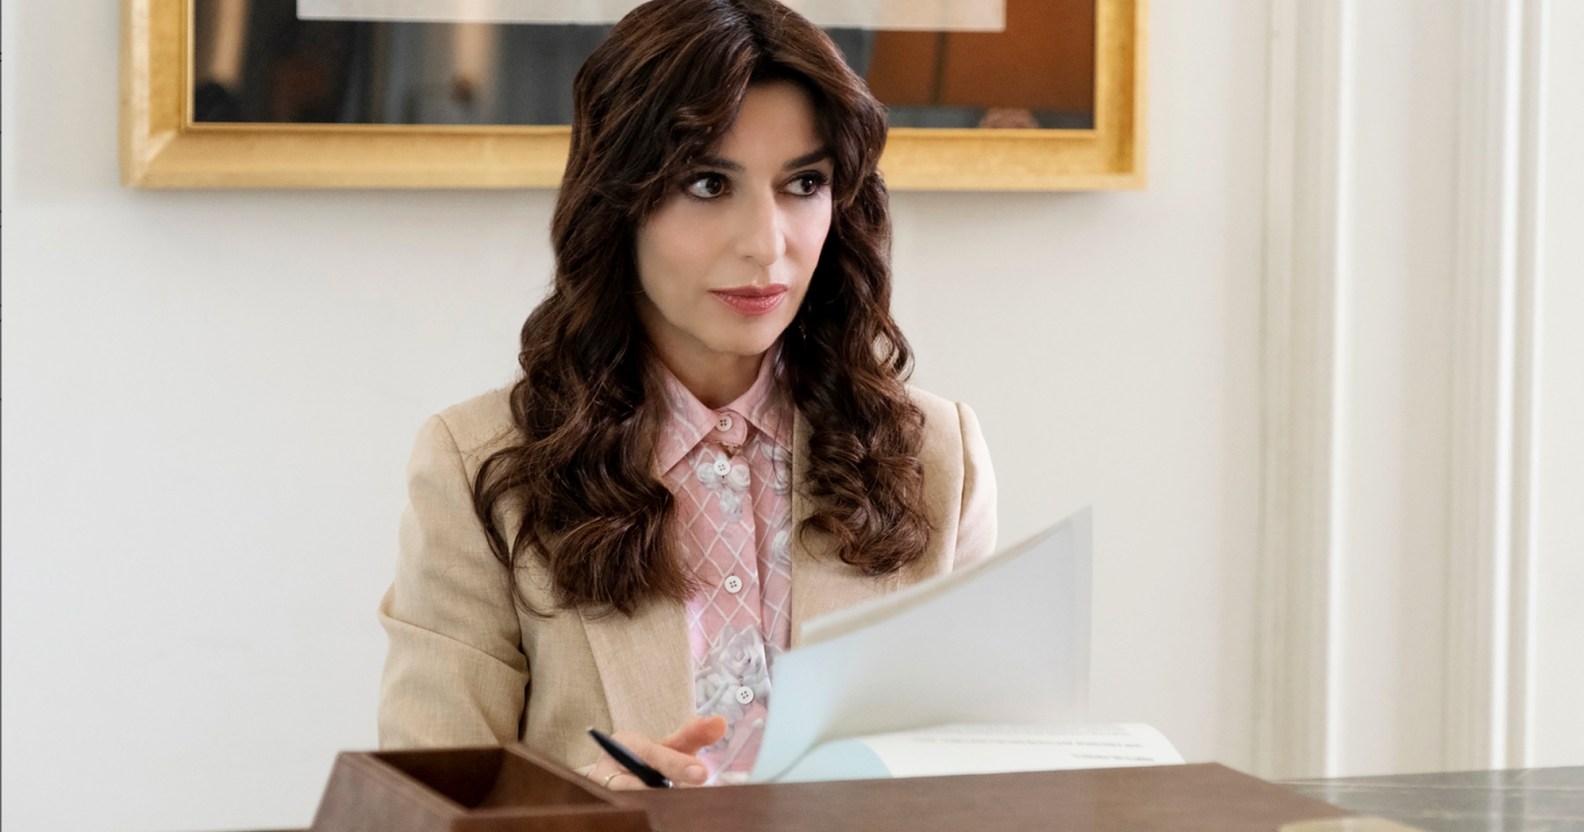 A still from HBO's The White Lotus shows actor Sabrina Impacciatore as Valentina dressed in a cream suit jacket and pink shirt standing behind a reception desk holding some papers.